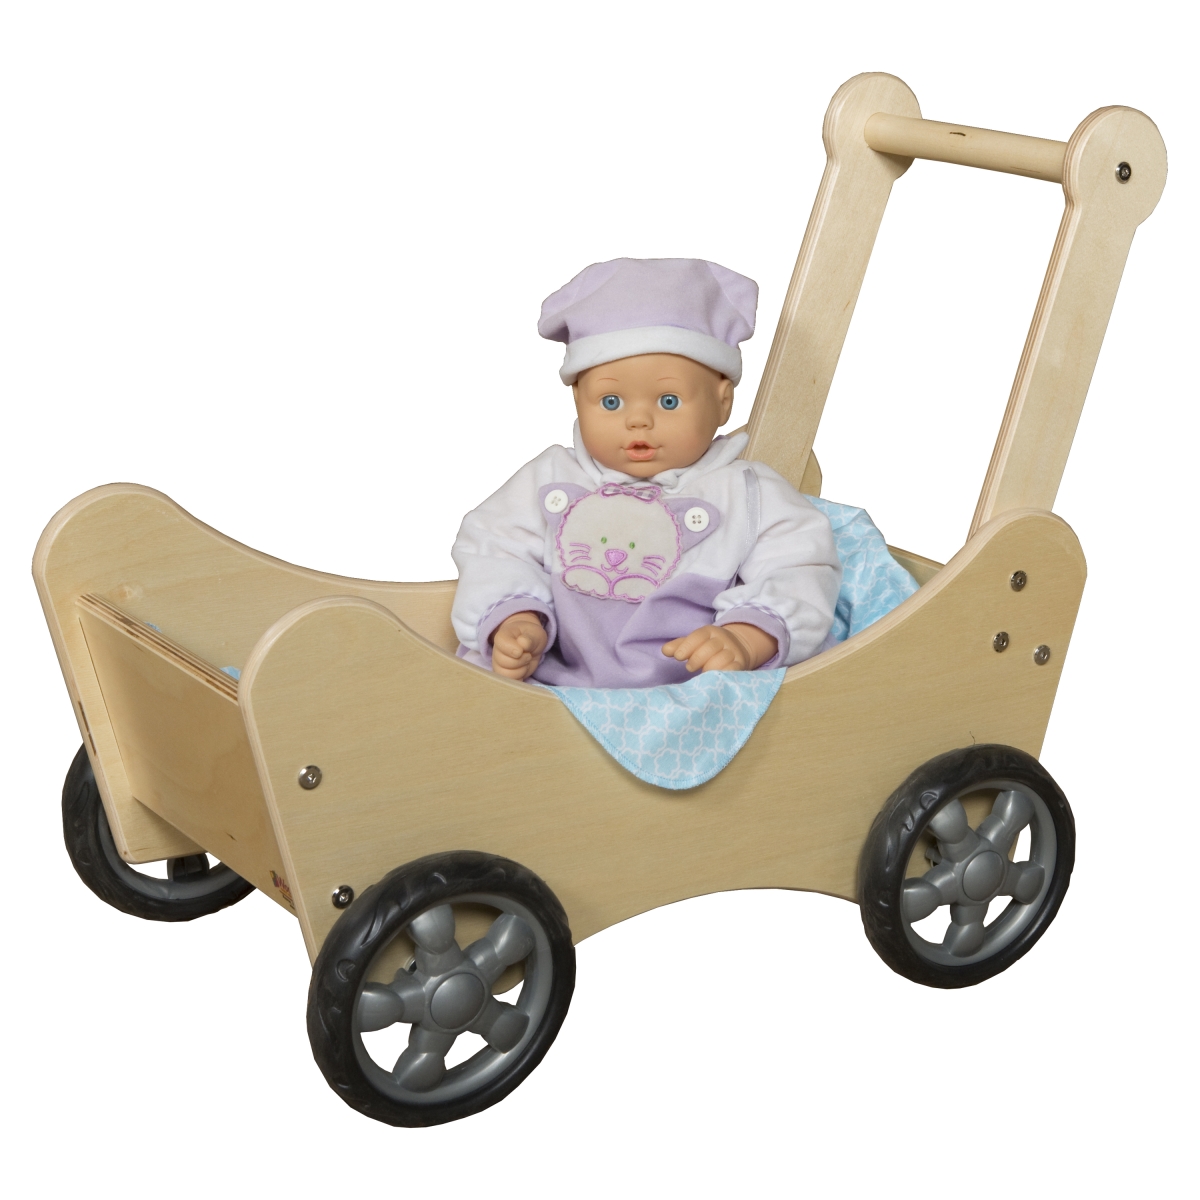 C11700 24 In. Doll Carriage - Rta